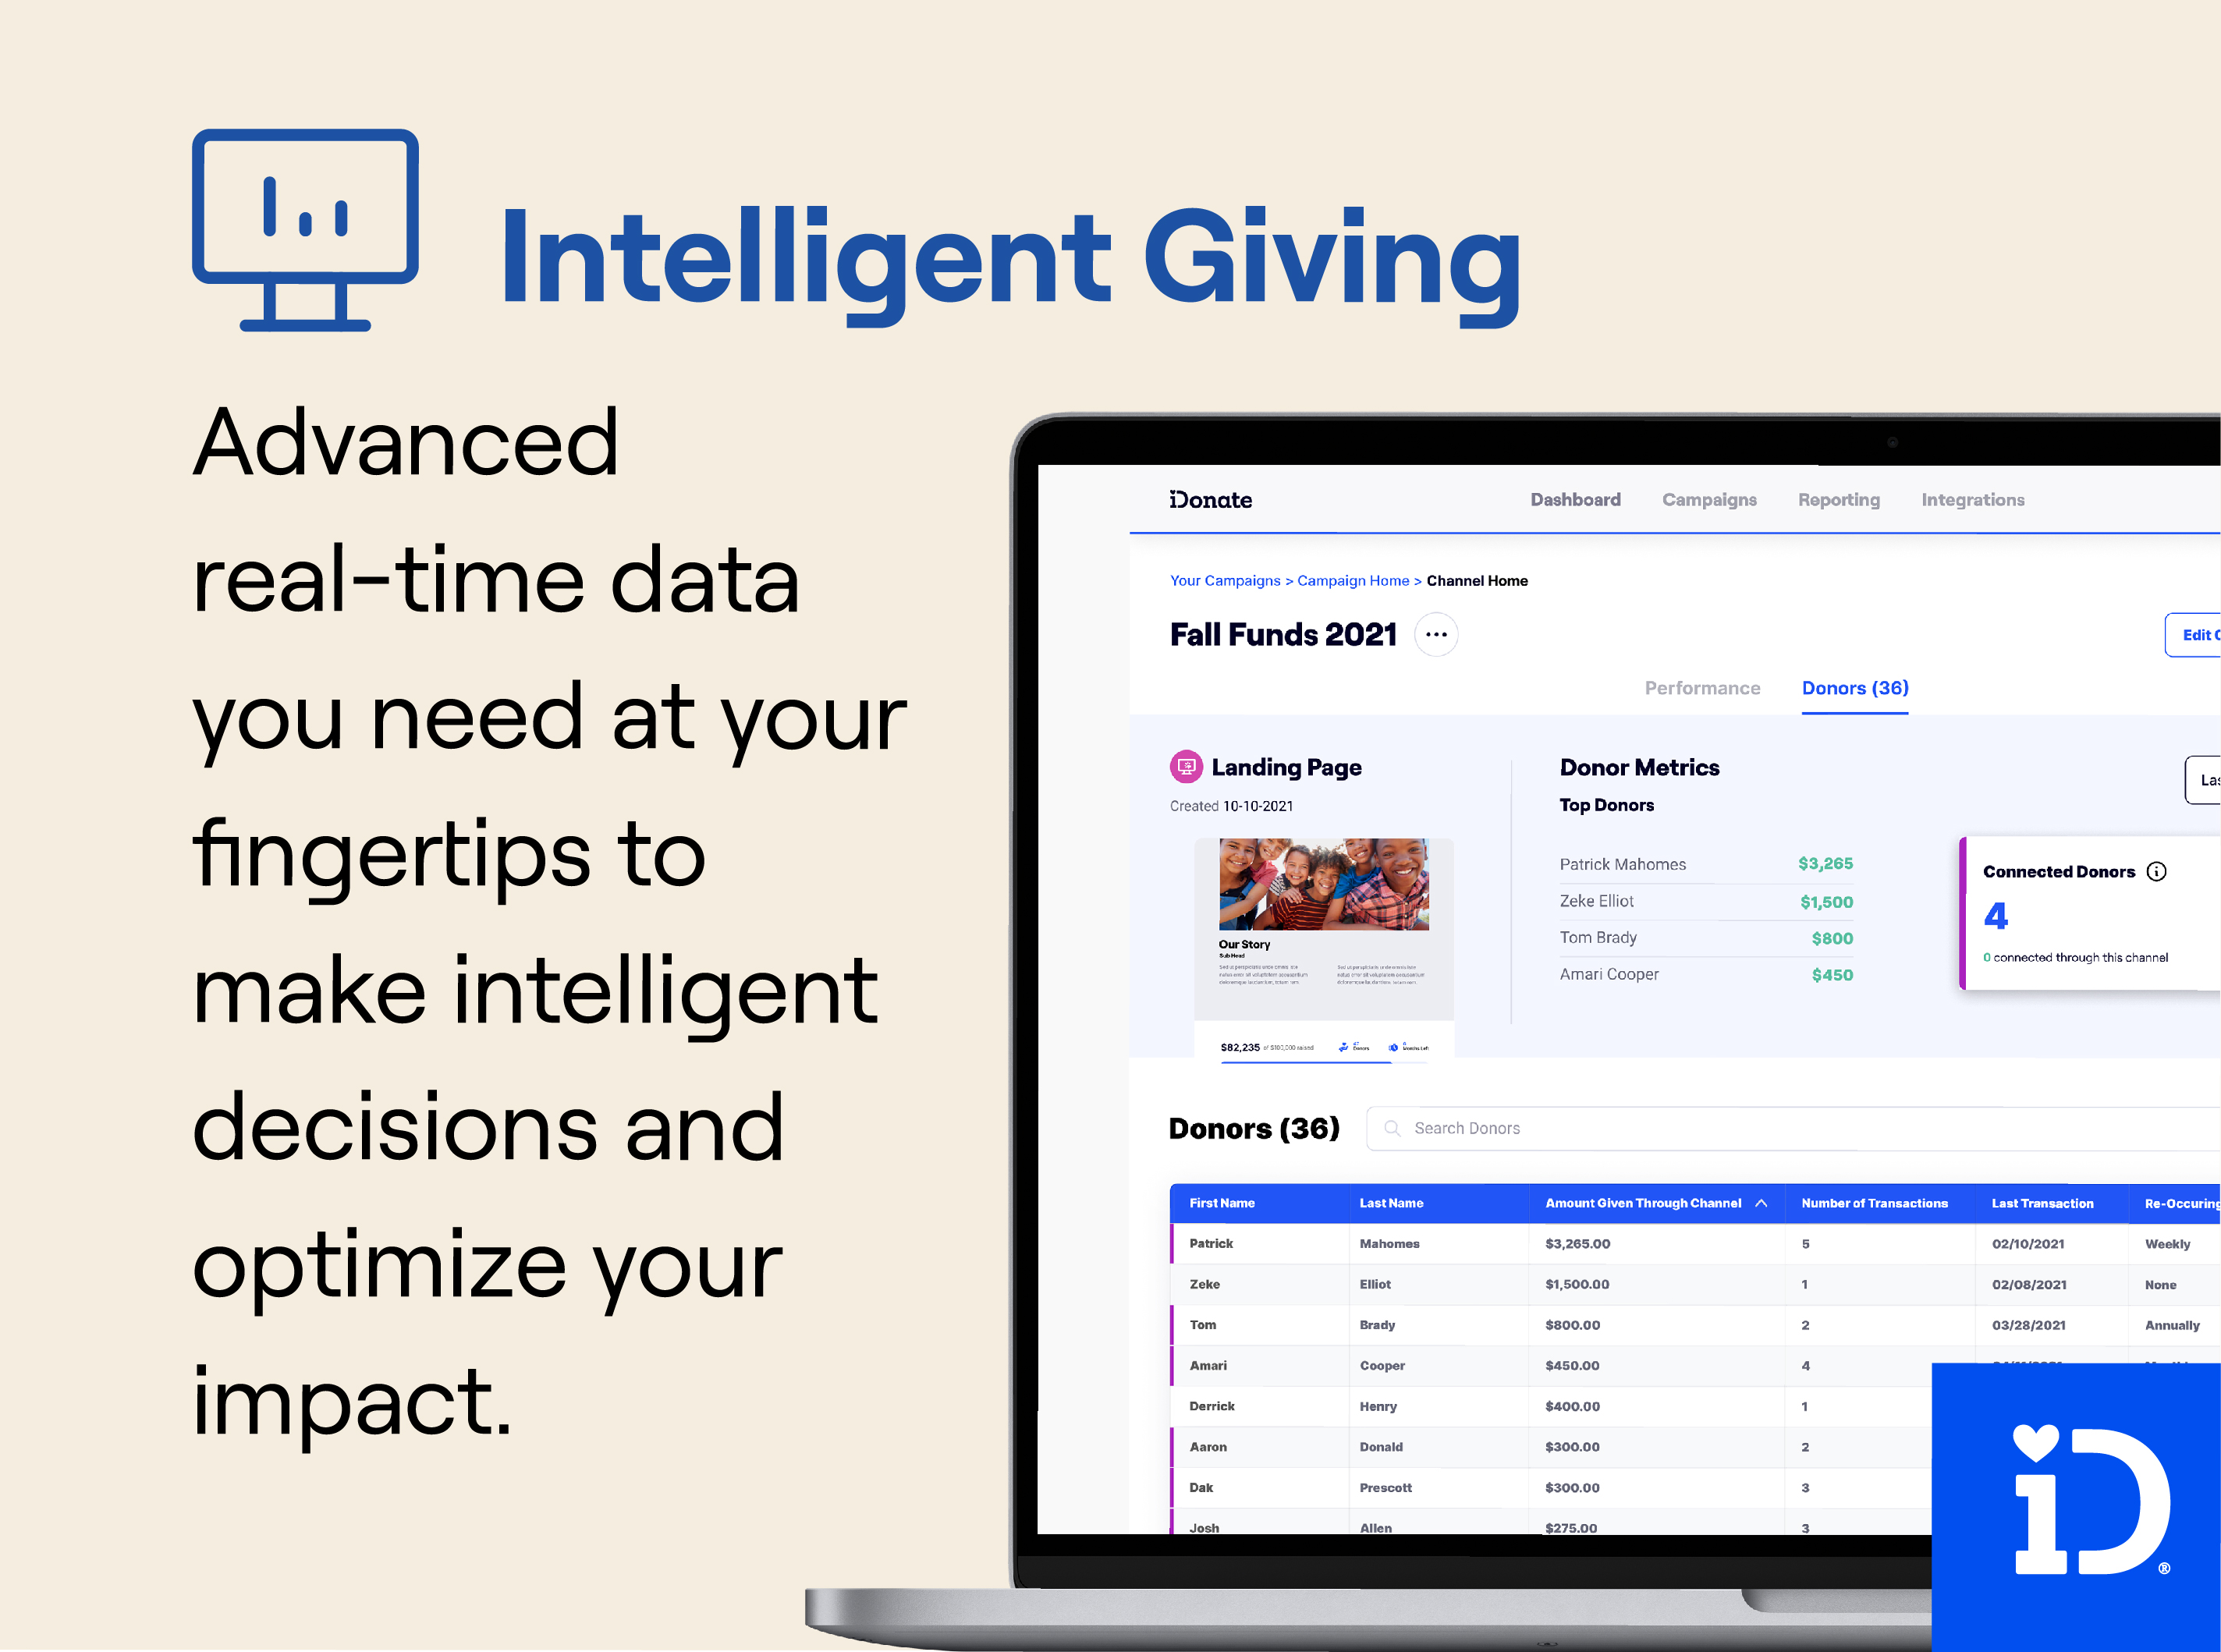 Simply Grow Your Impact. Finally, you can easily implement advanced fundraising strategies proven to increase donor acquisition, retention, recurring gifts, & more with only a few simple clicks.